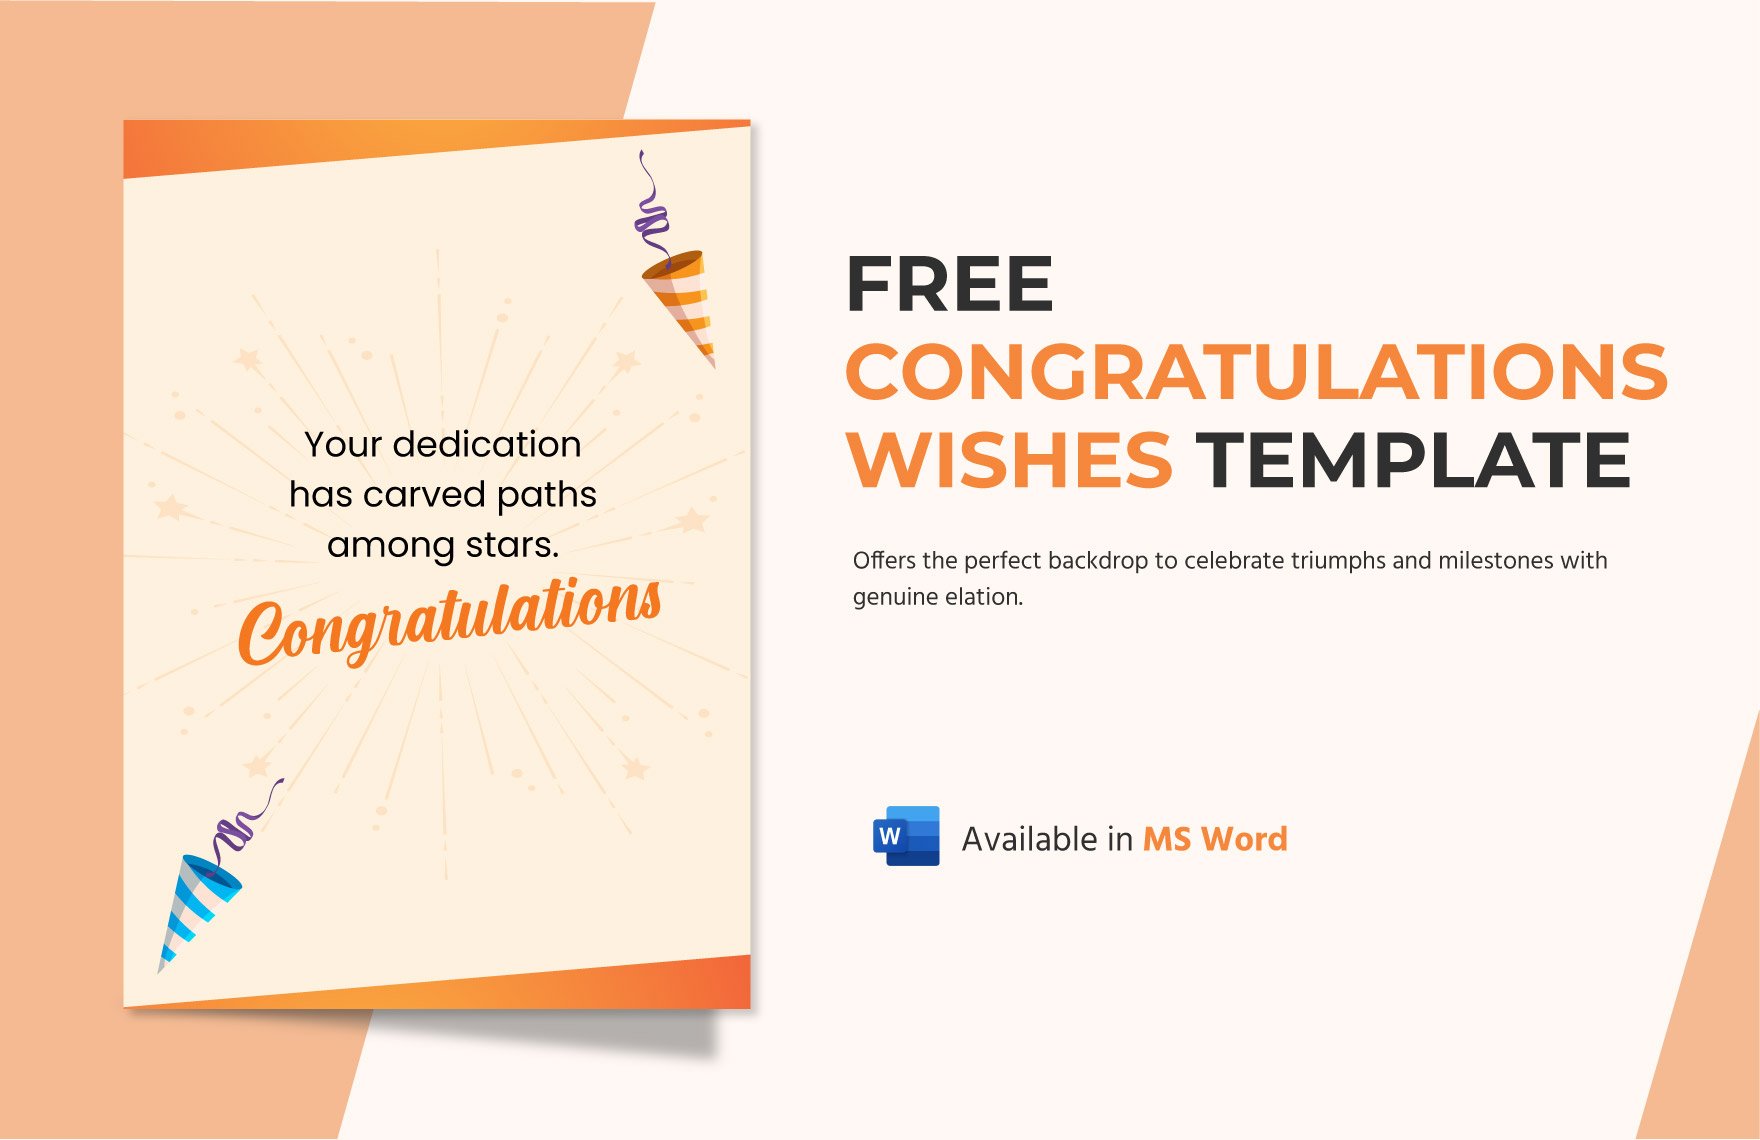 Free Congratulations Wishes Template in Word